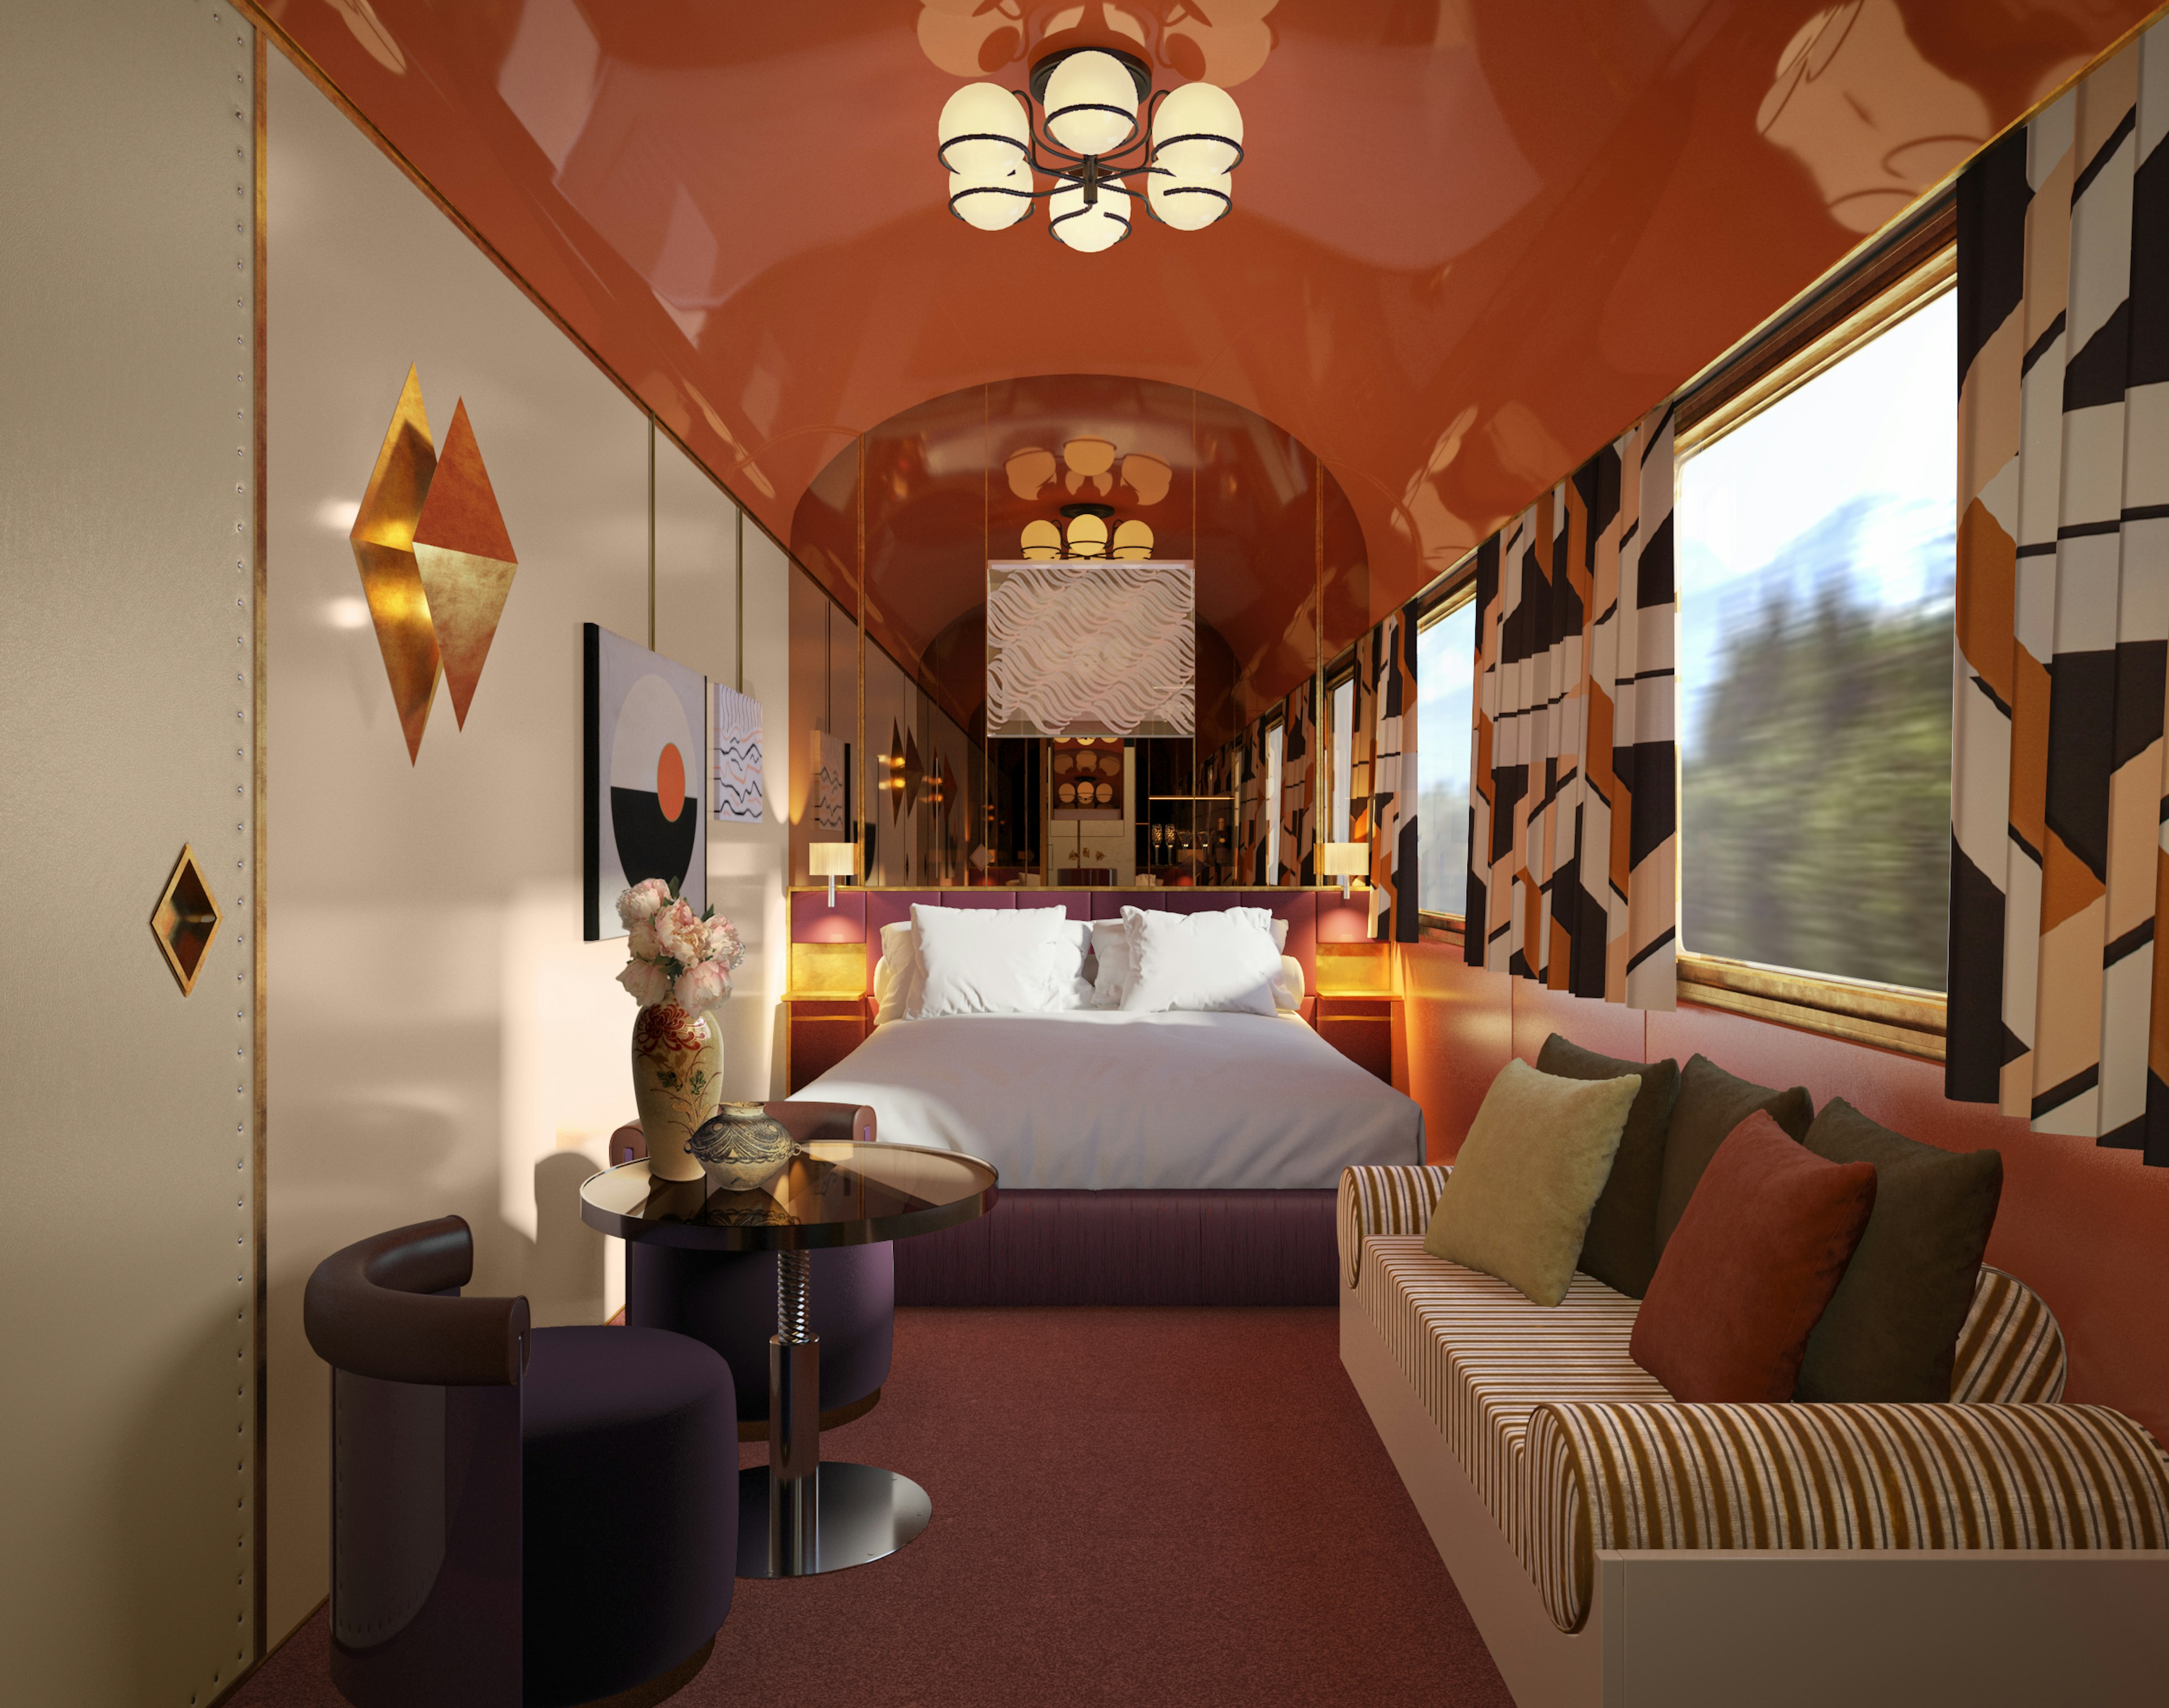 Inside the new Orient Express train ready to depart from Italy in 2023